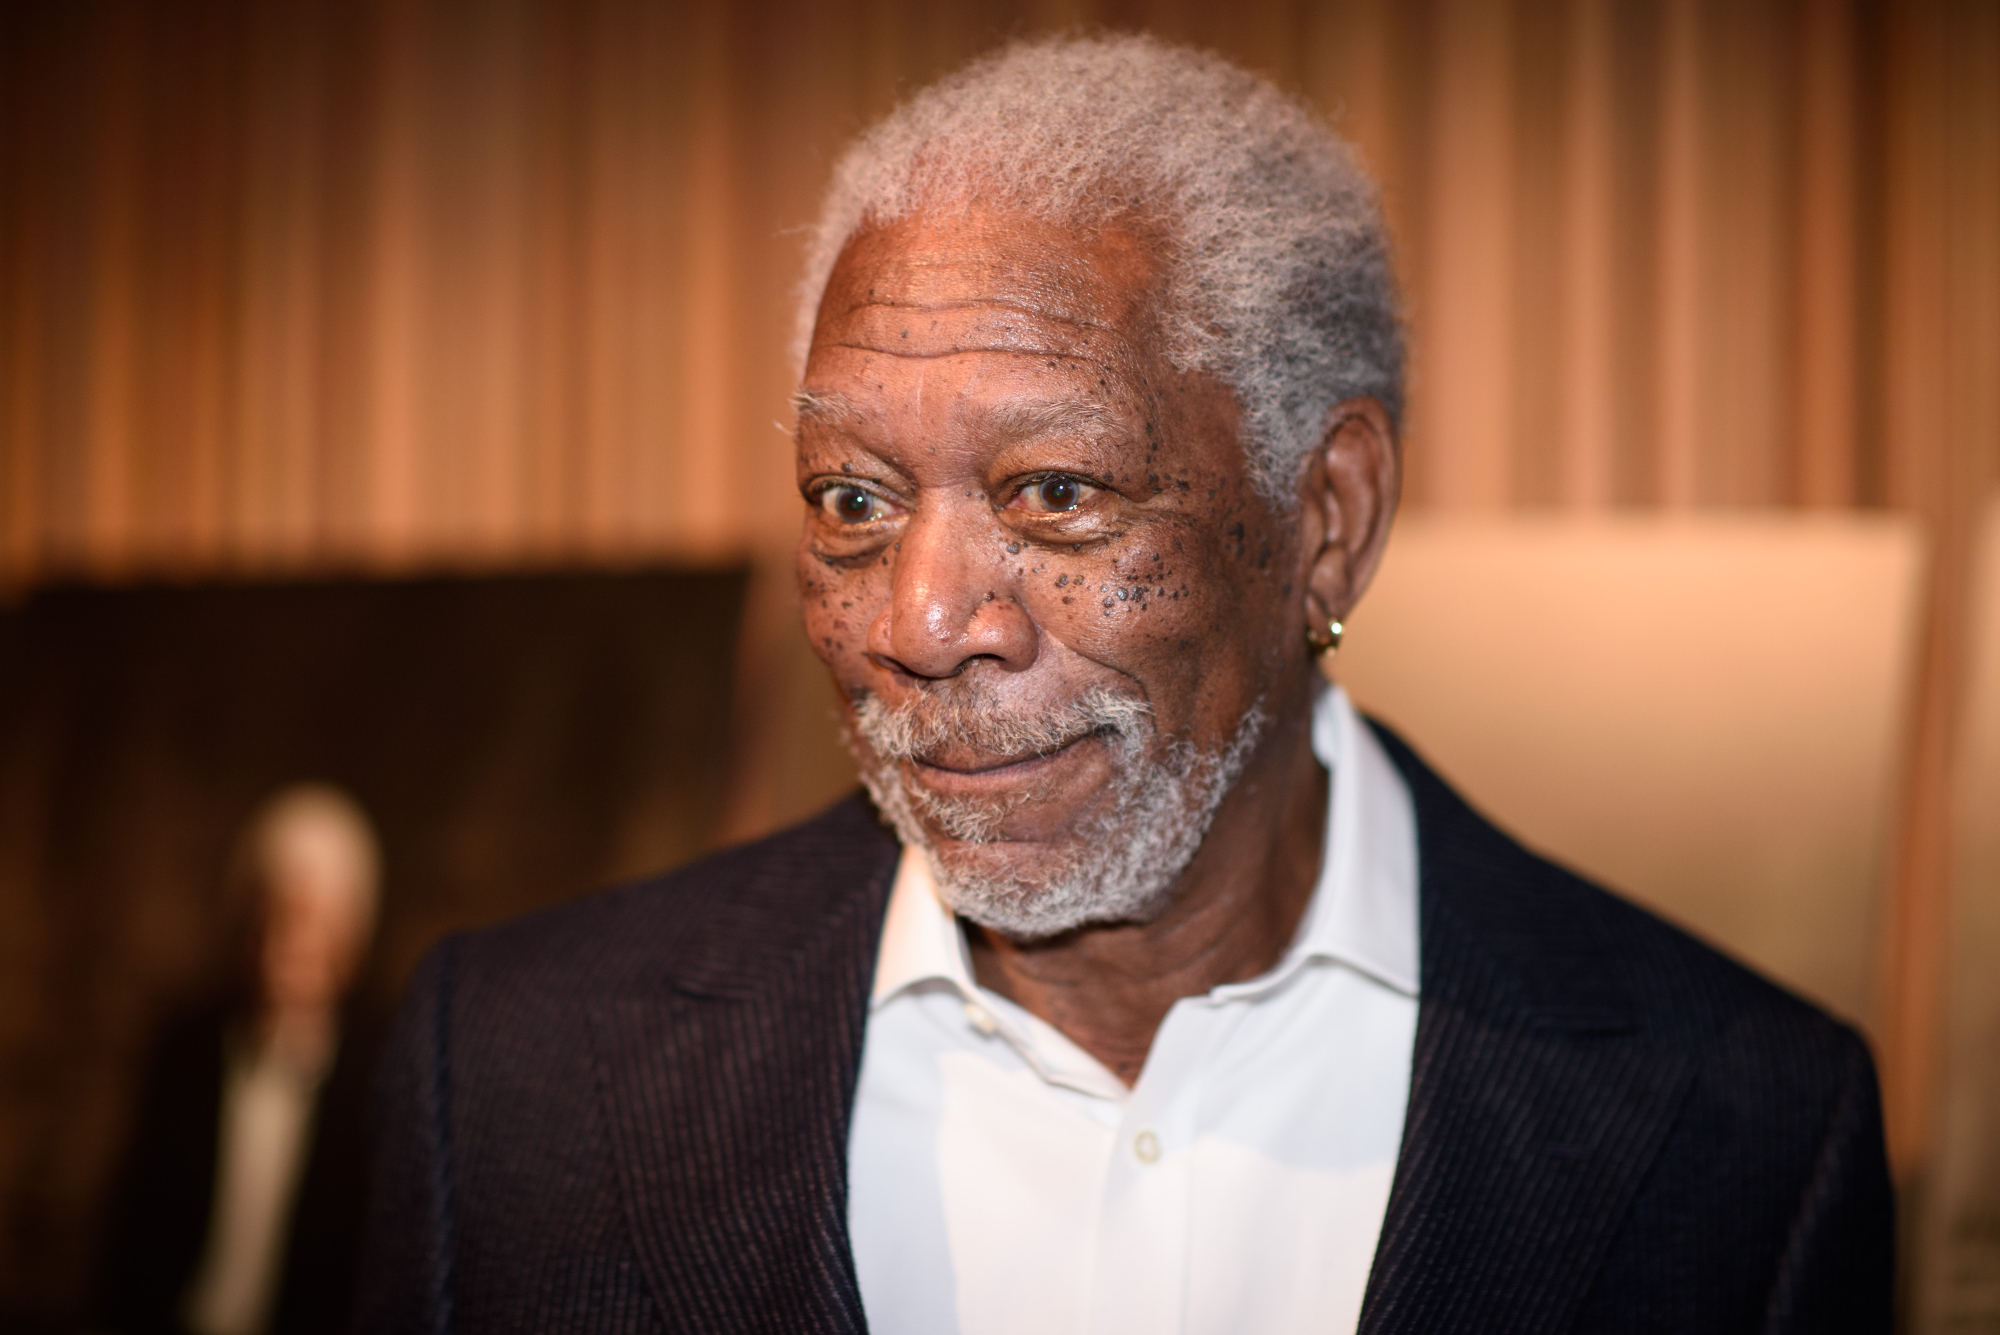 Morgan Freeman, the man with an iconic voice, wearing a suit